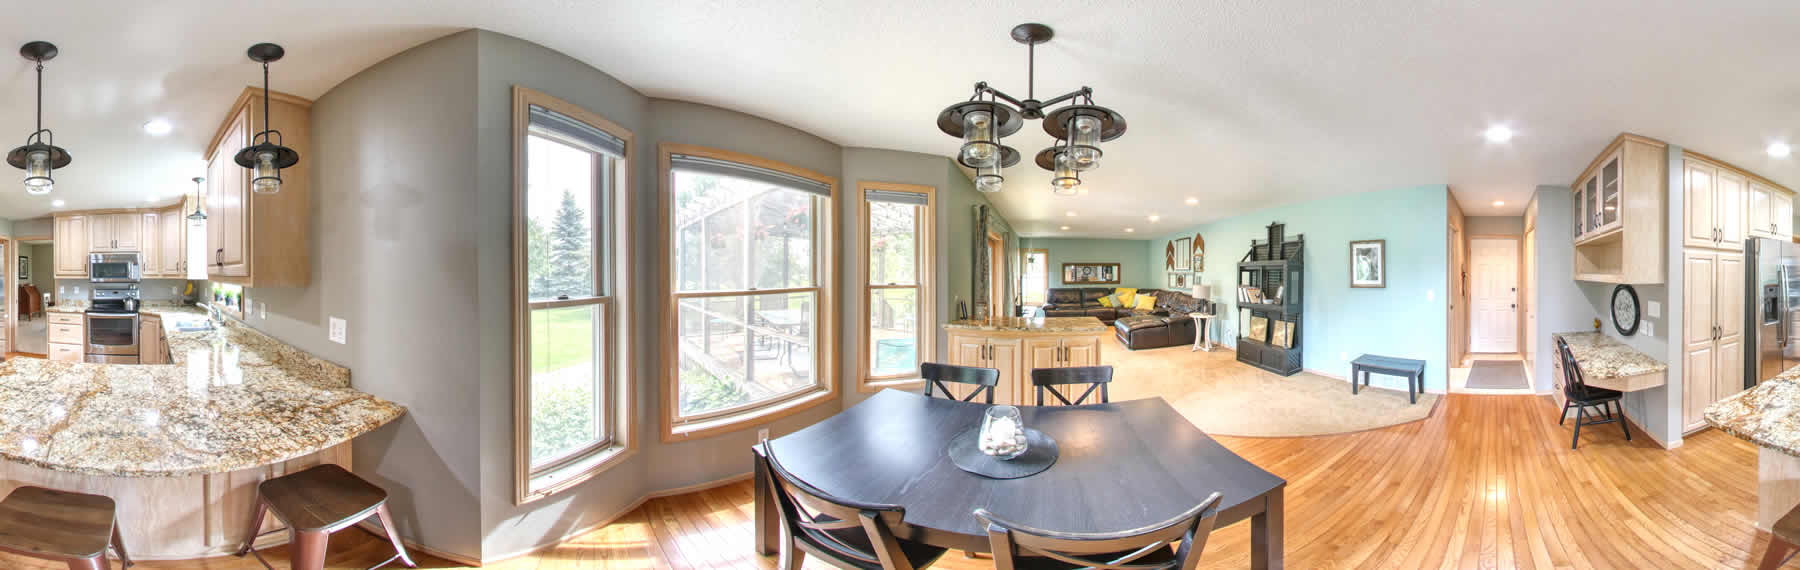 Real Estate Virtual Tours and Photography in Fargo, Moorhead, and Detroit Lakes.